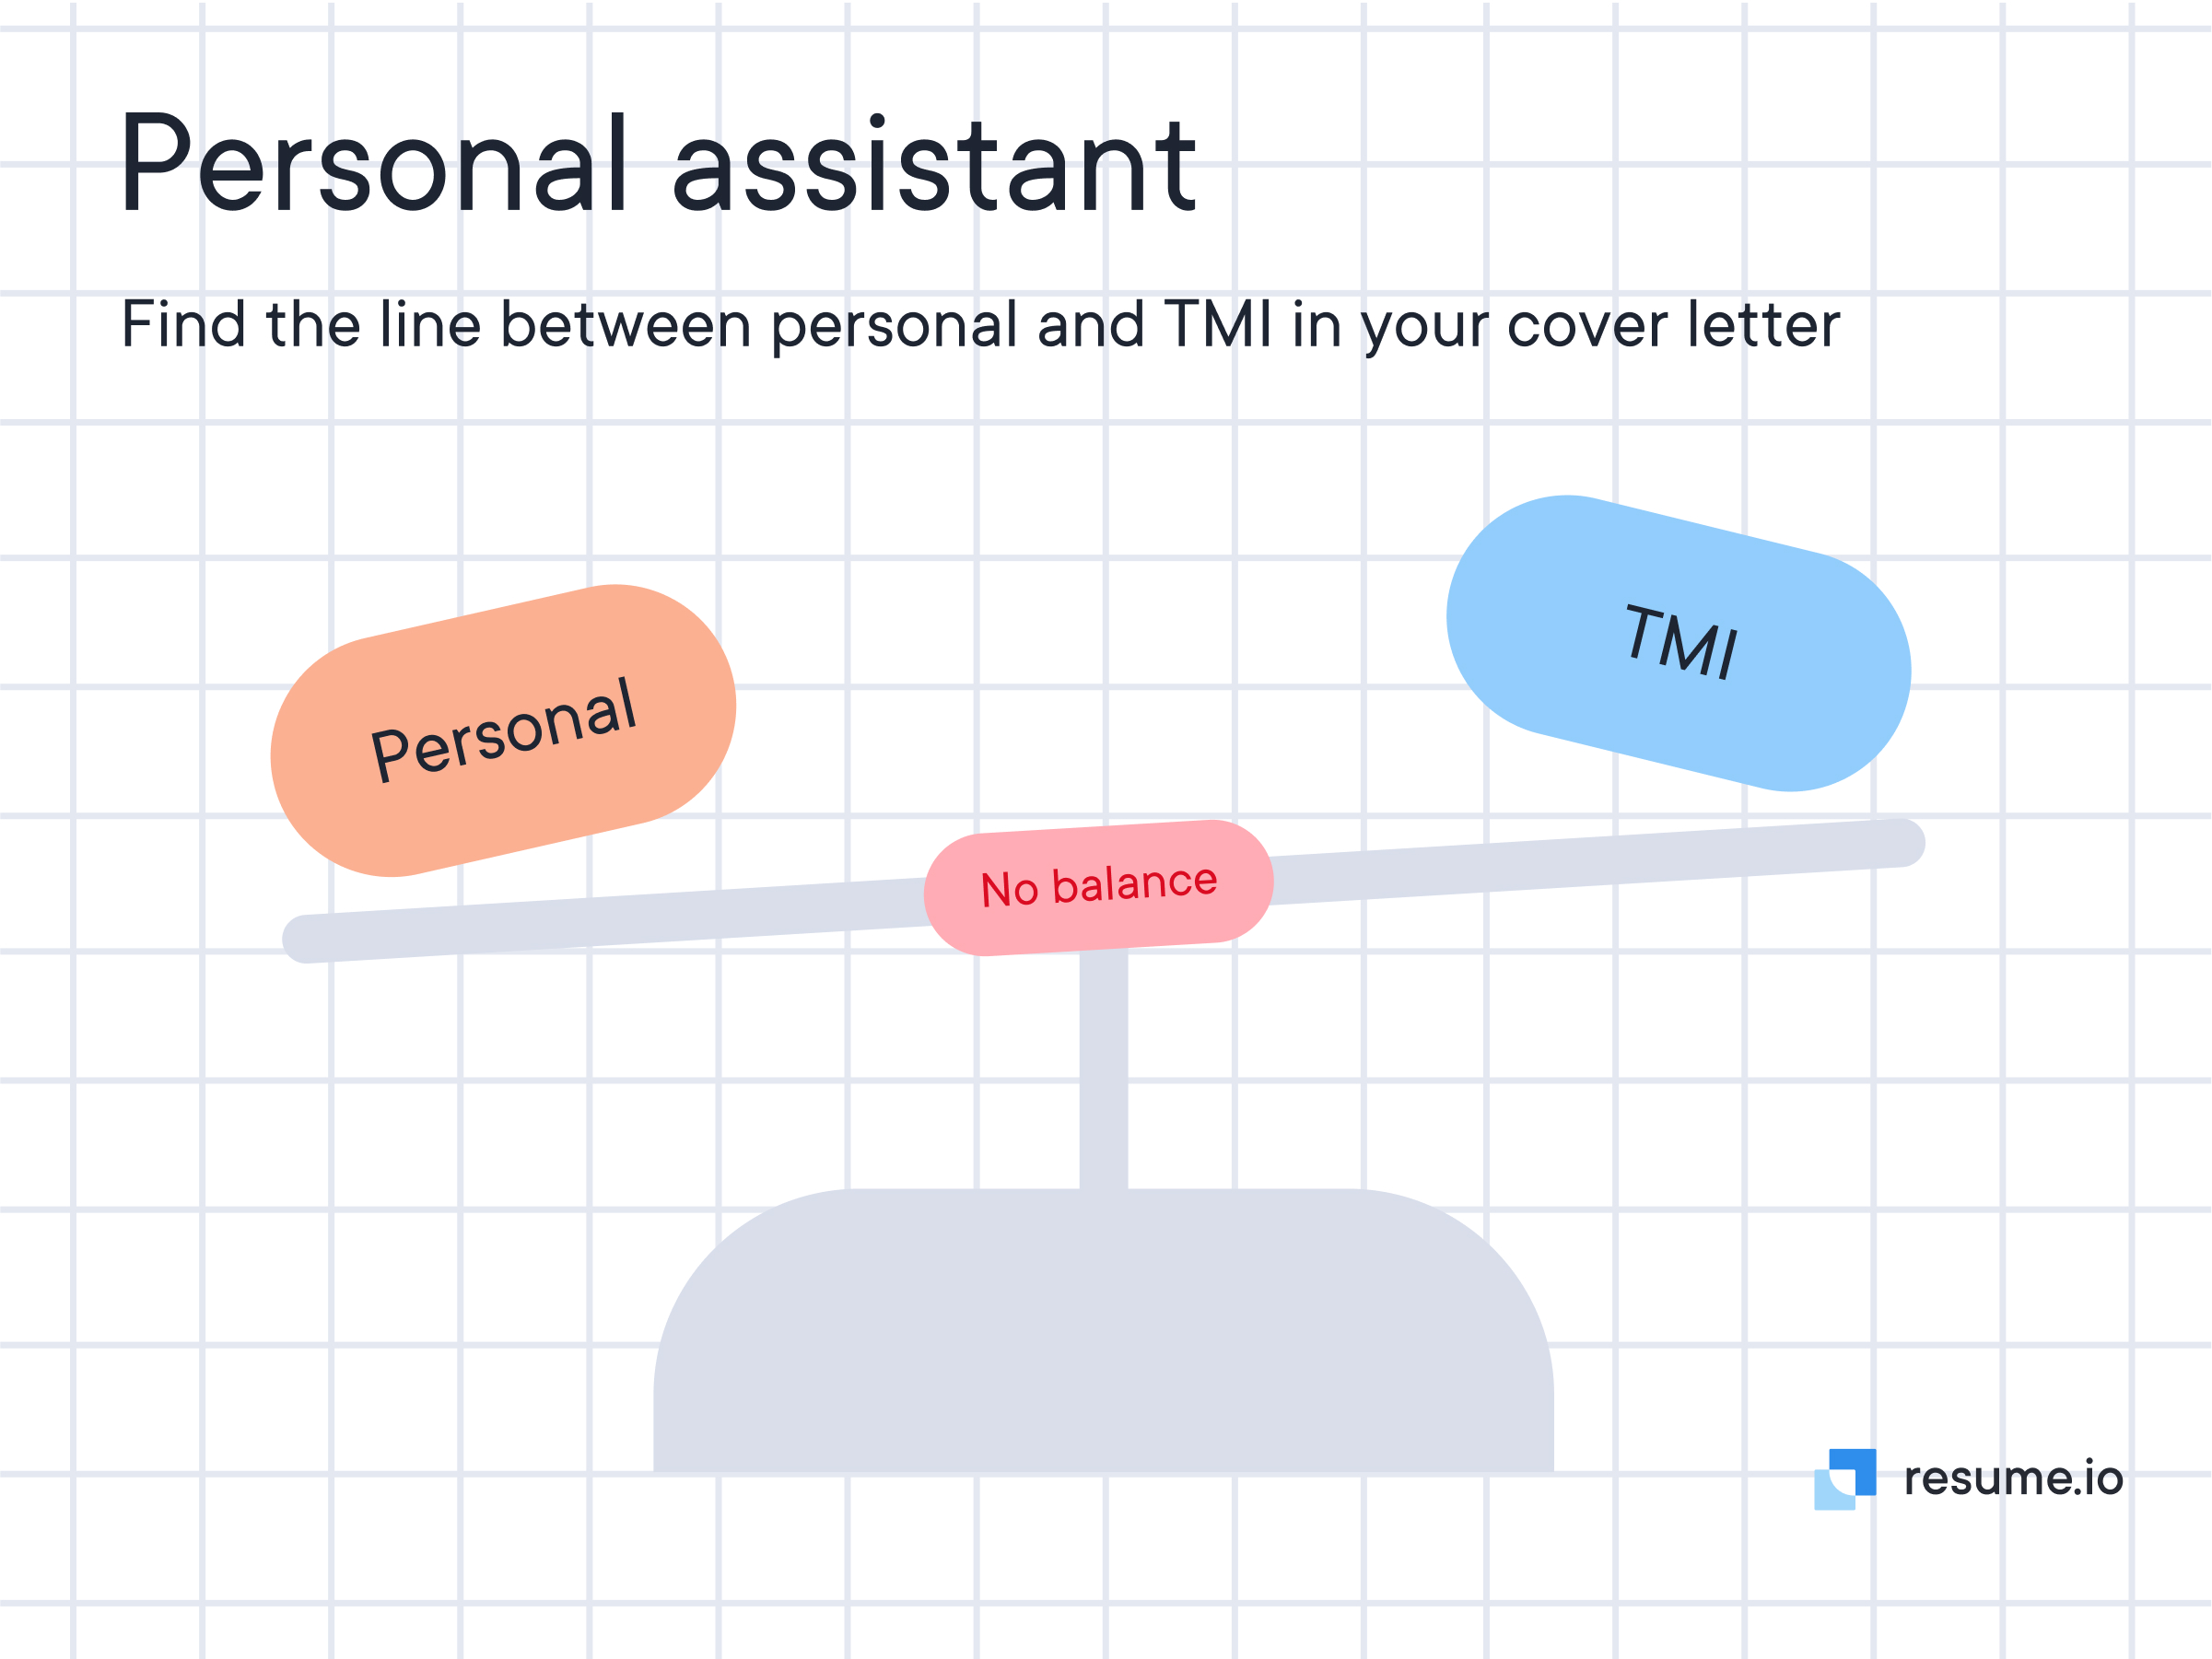 Balance between personal and TMI in cover letter